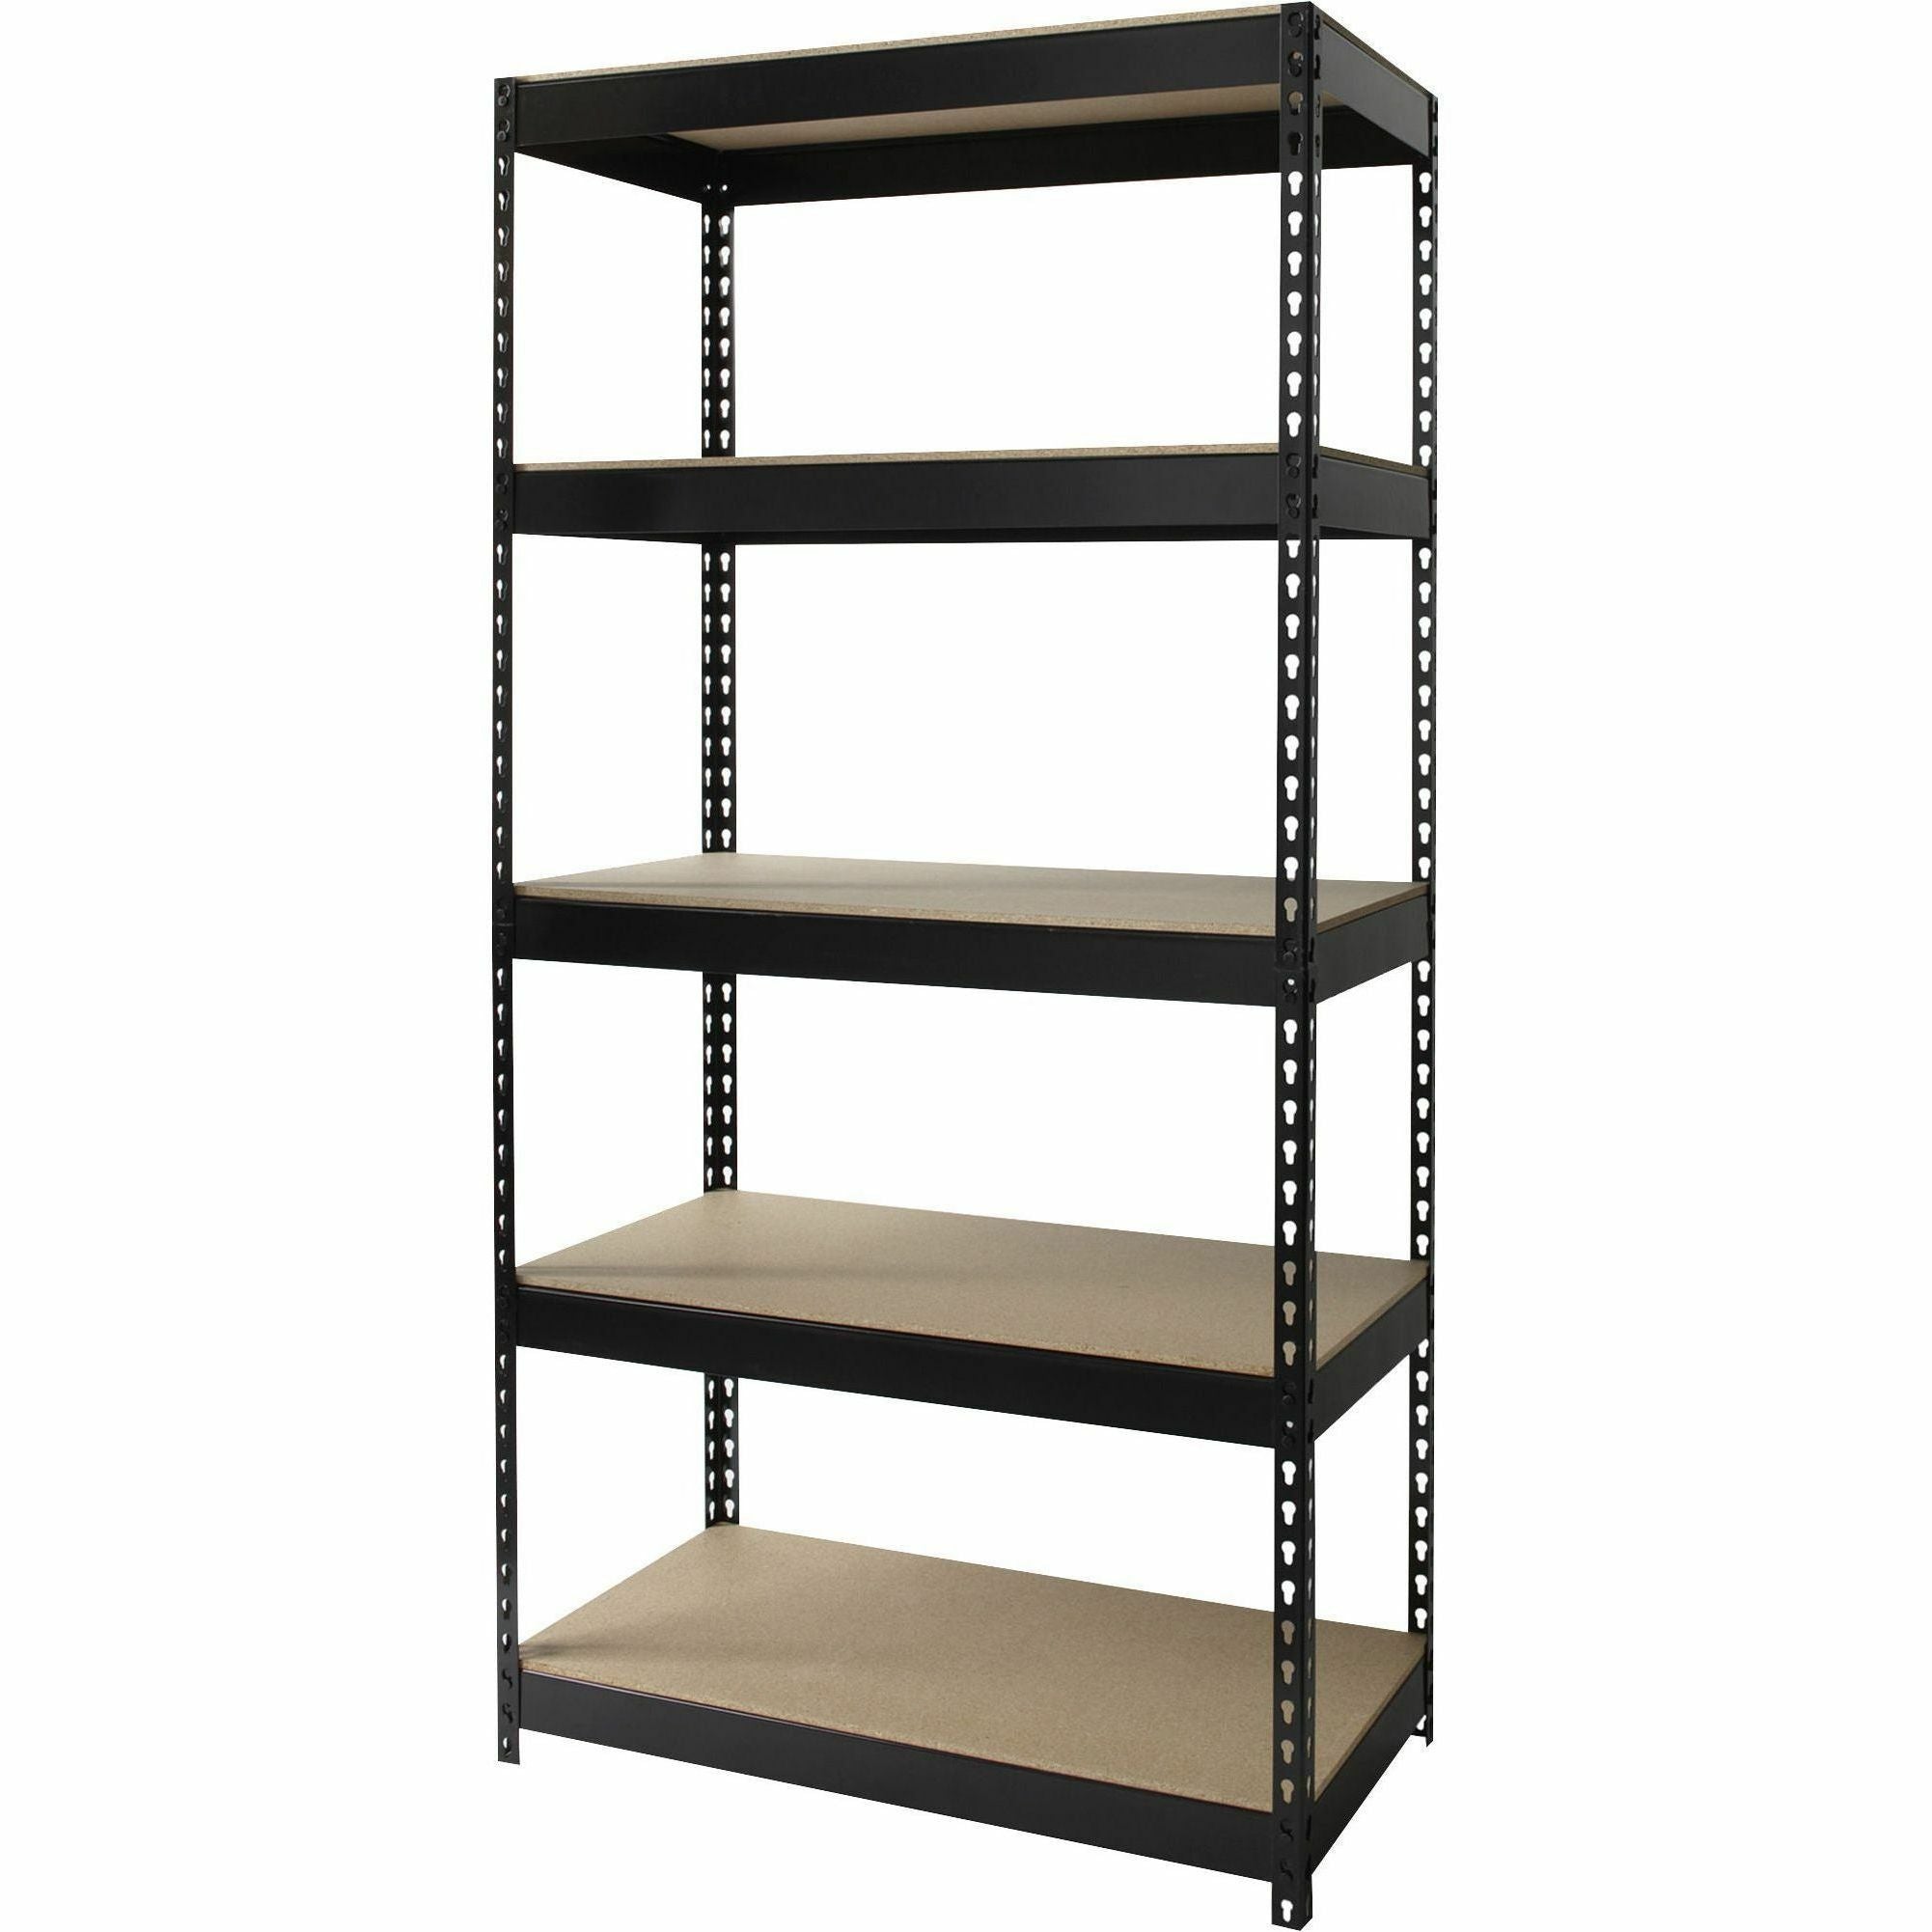 Lorell Fortress Riveted Shelving - 5 Compartment(s) - 5 Shelf(ves) - 72" Height x 36" Width x 18" Depth - Heavy Duty, Rust Resistant - 28% Recycled - Powder Coated - Black - Steel - 1 Each - 